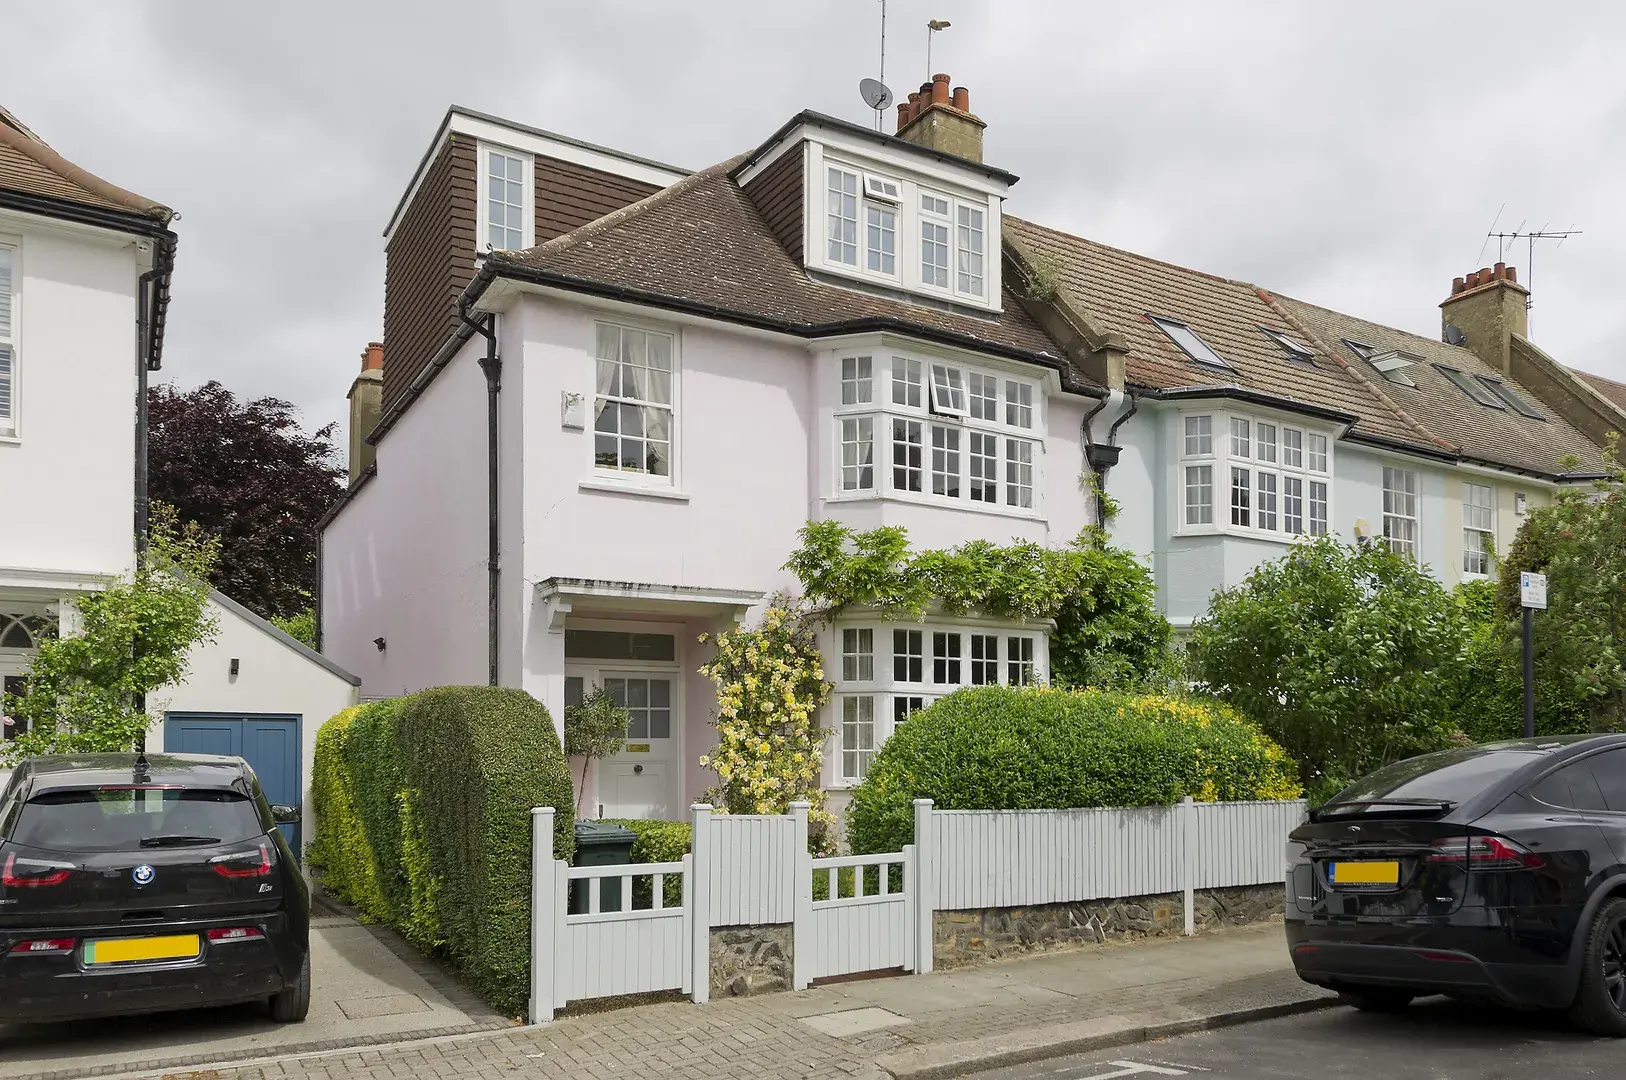 Frewin Road, holiday home in Wandsworth, London